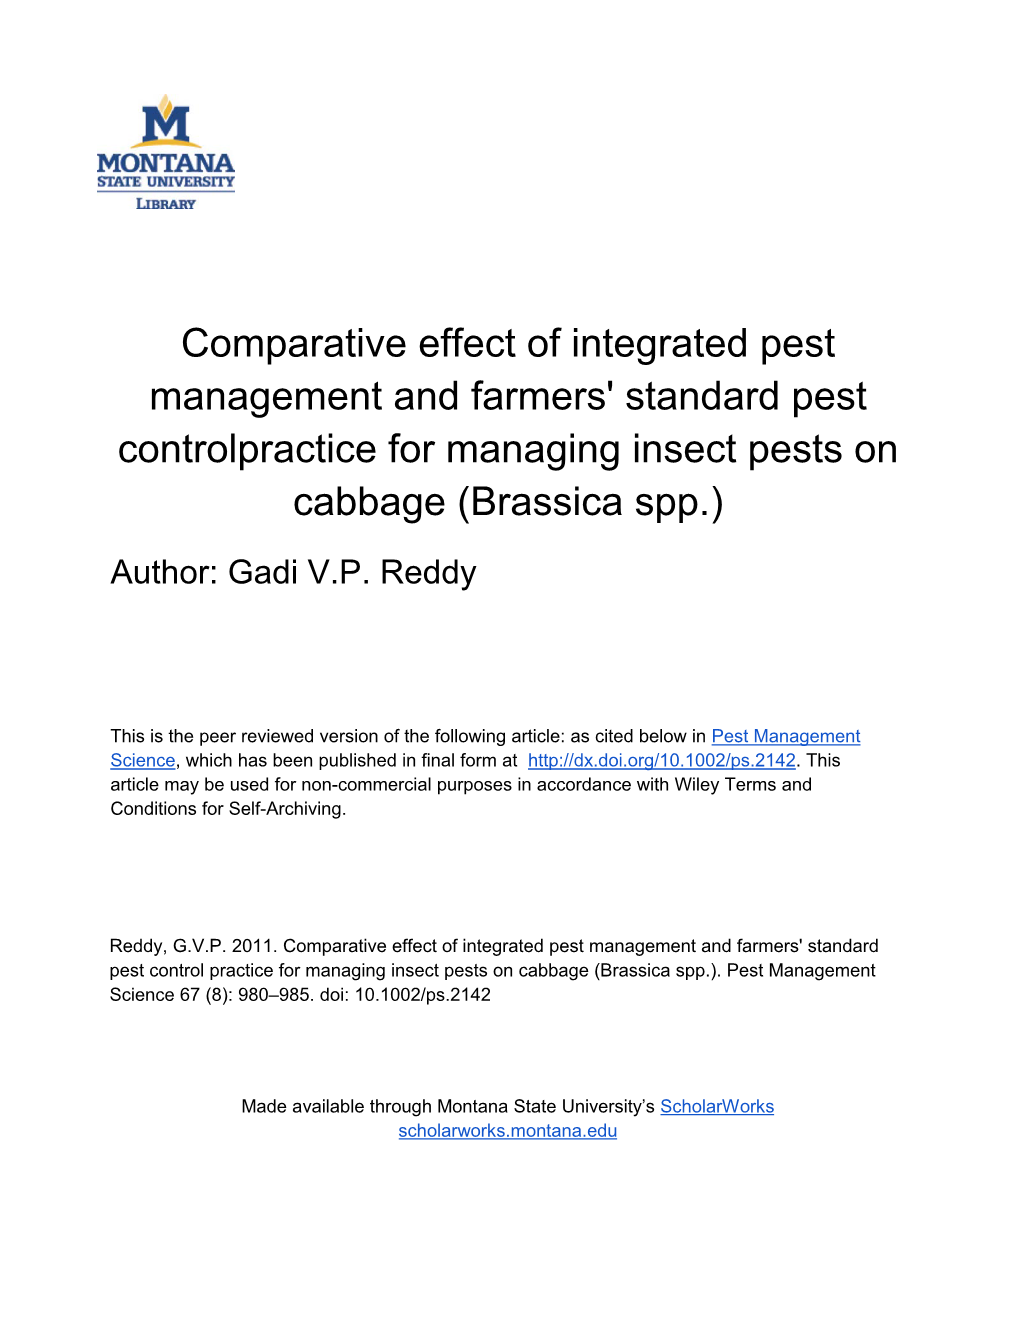 Comparative Effect of Integrated Pest Management and Farmers' Standard Pest Controlpractice for Managing Insect Pests on Cabbage (Brassica Spp.) Author: Gadi V.P